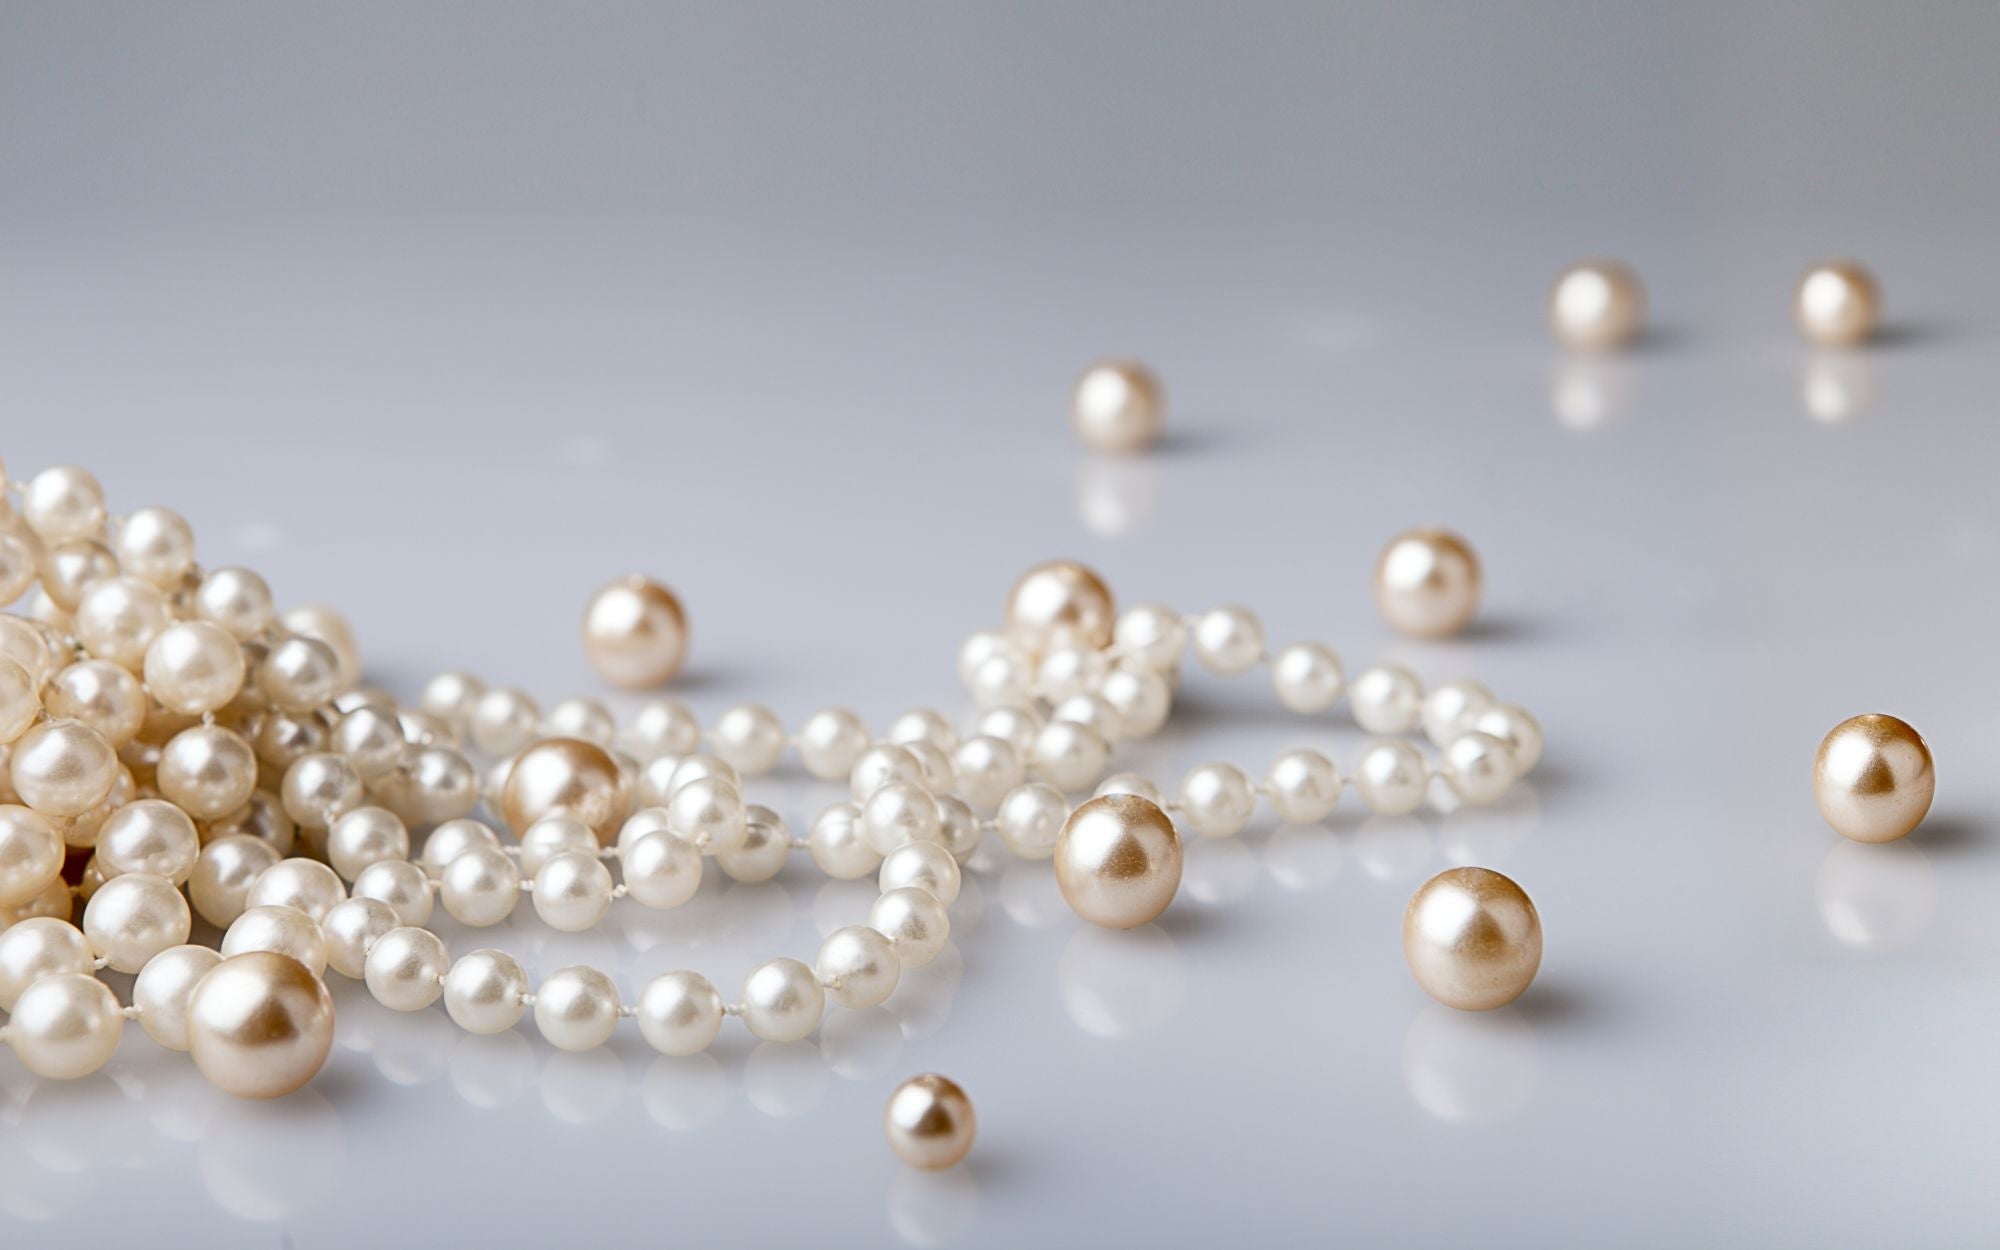 how much are pearls worth - pearl value